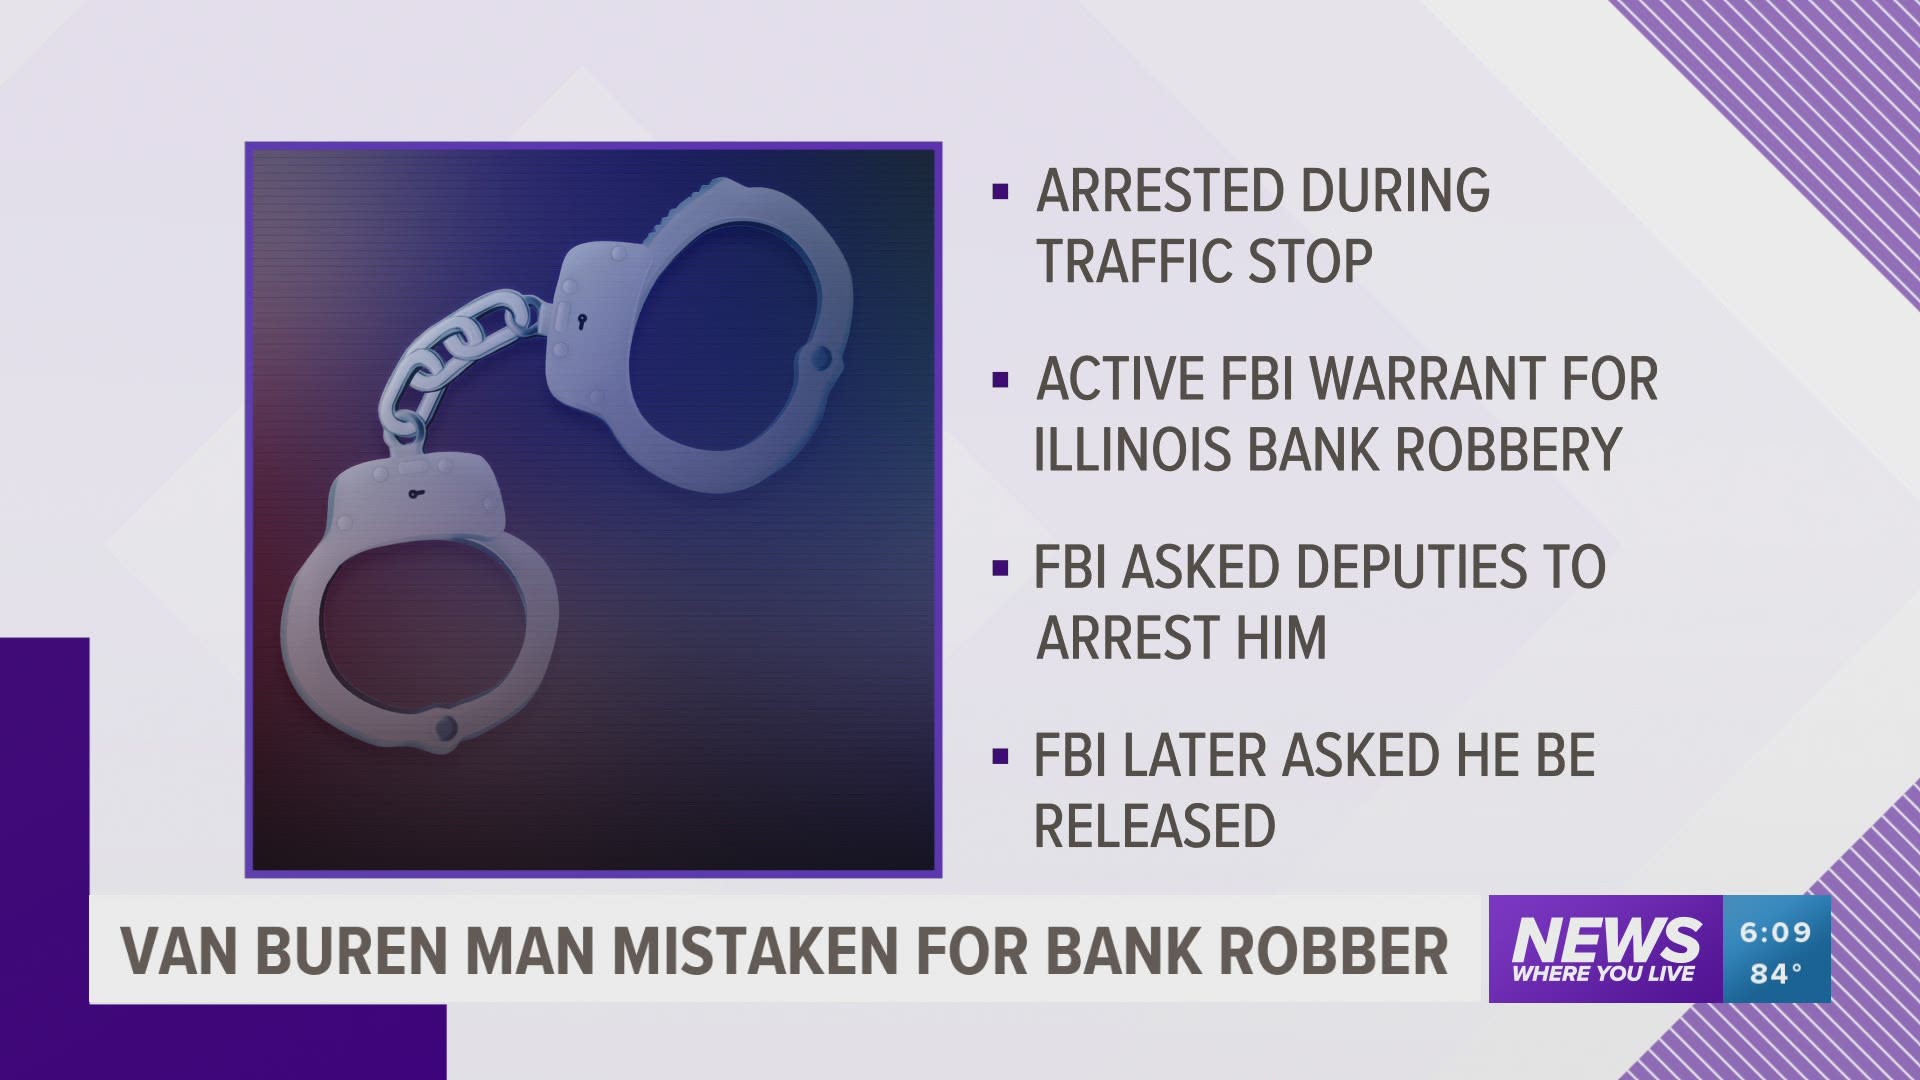 A Van Buren man has been released from custody after being mistakenly identified as an Illinois bank robbery suspect. https://bit.ly/2Gri44V